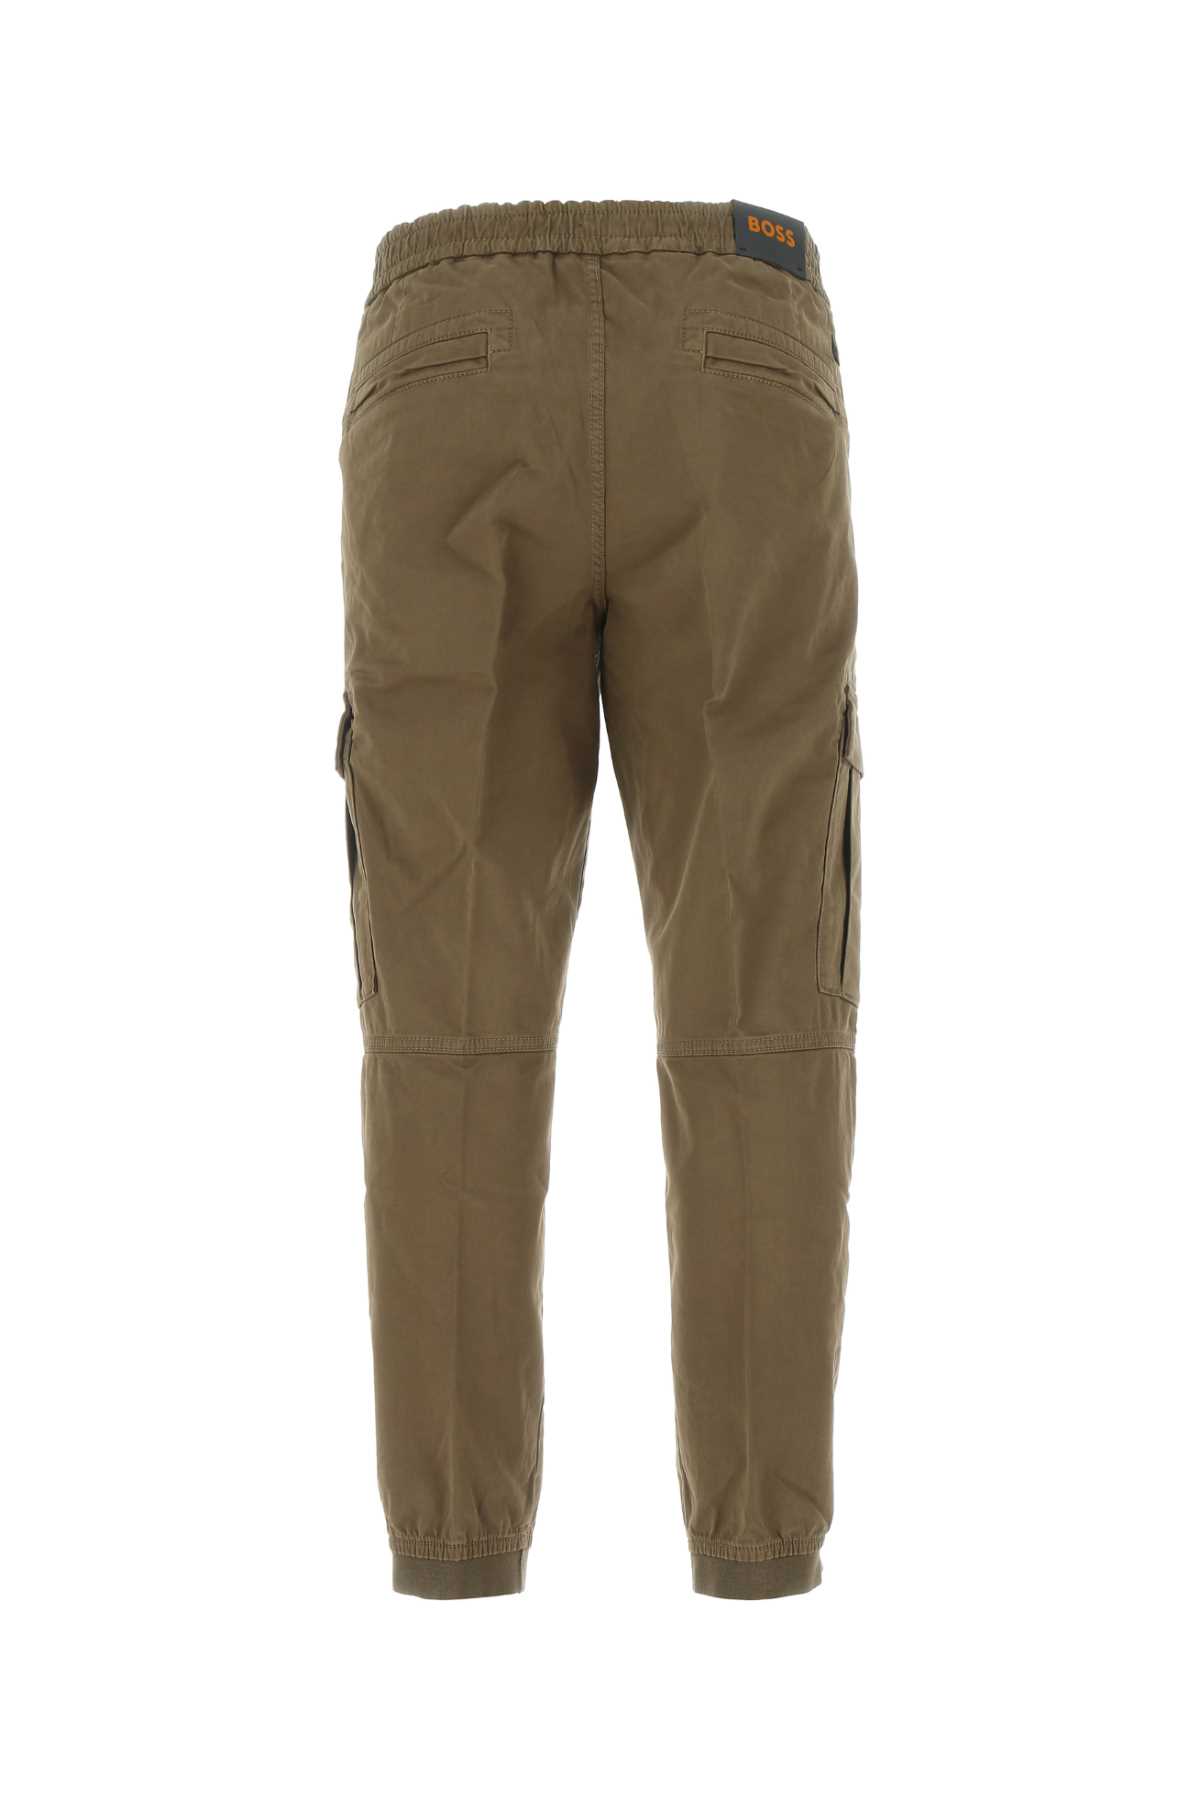 Hugo Boss Brown Stretch Cotton Cargo Pant In 308